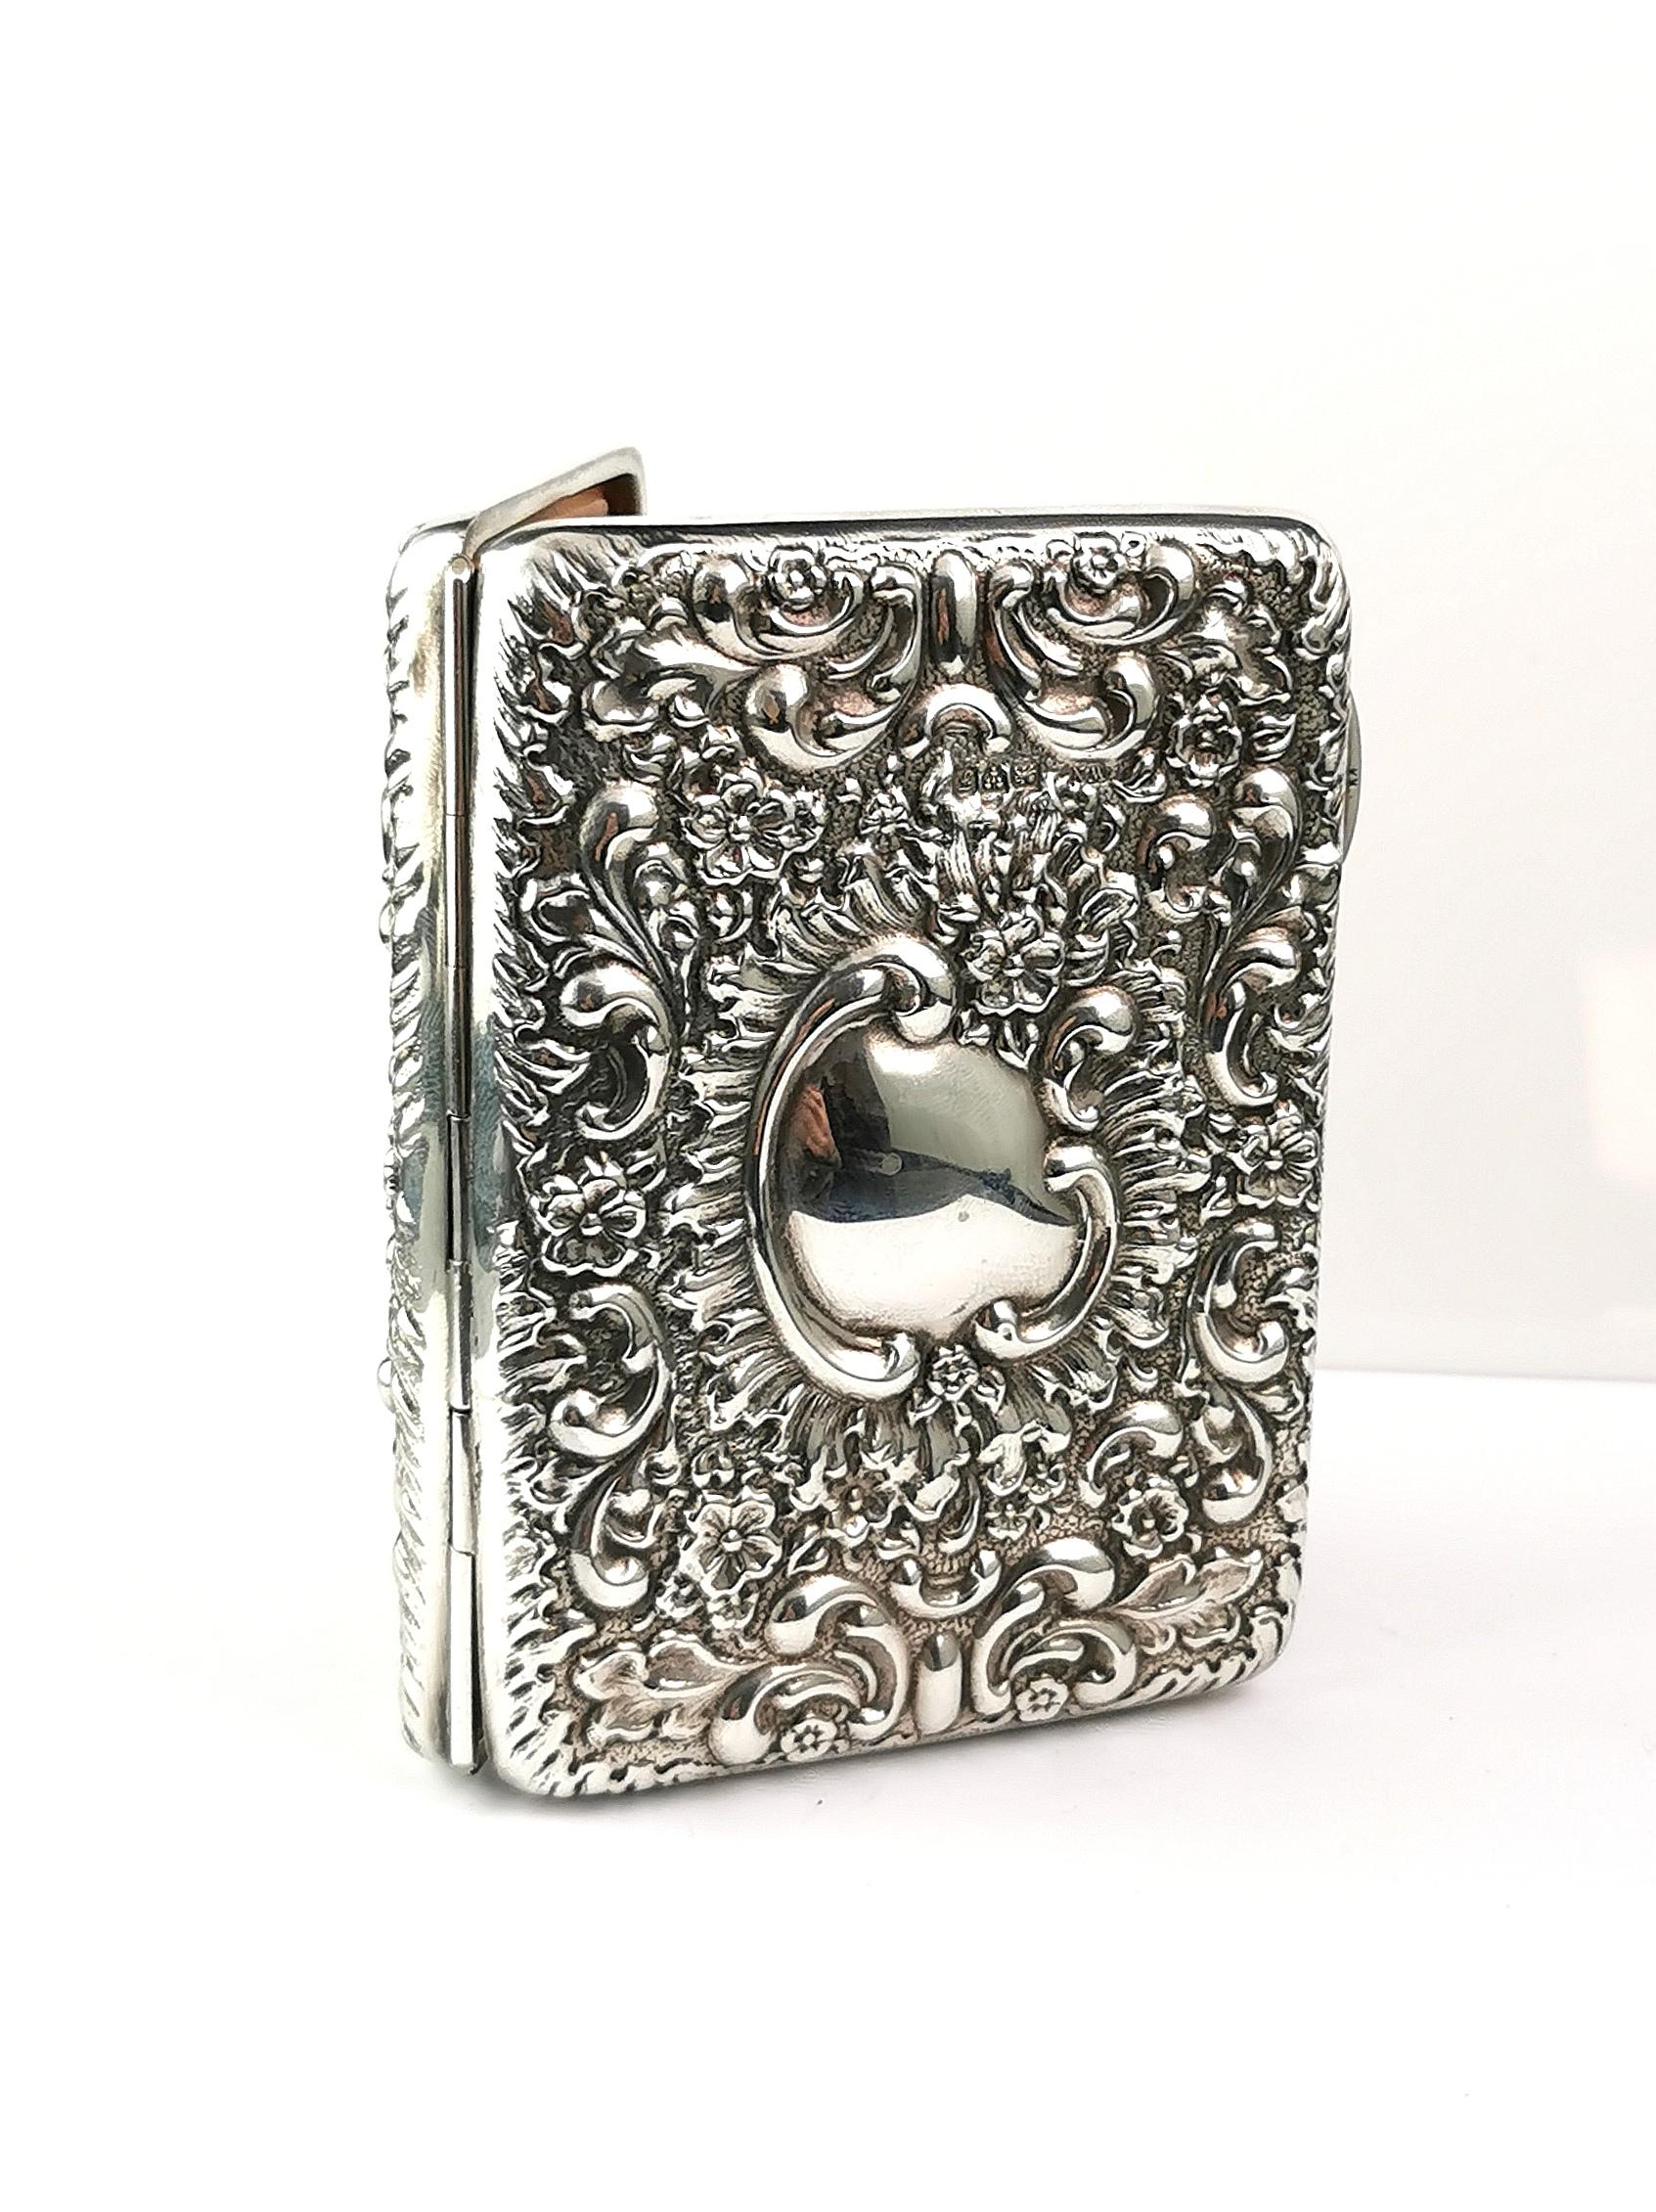 An attractive and substantial antique sterling silver Aide Memoire and card case.

This is a very good quality and heavy sterling silver Aide Memoire with a tan leather interior and a space for cards and notes.

It has a small silver plated